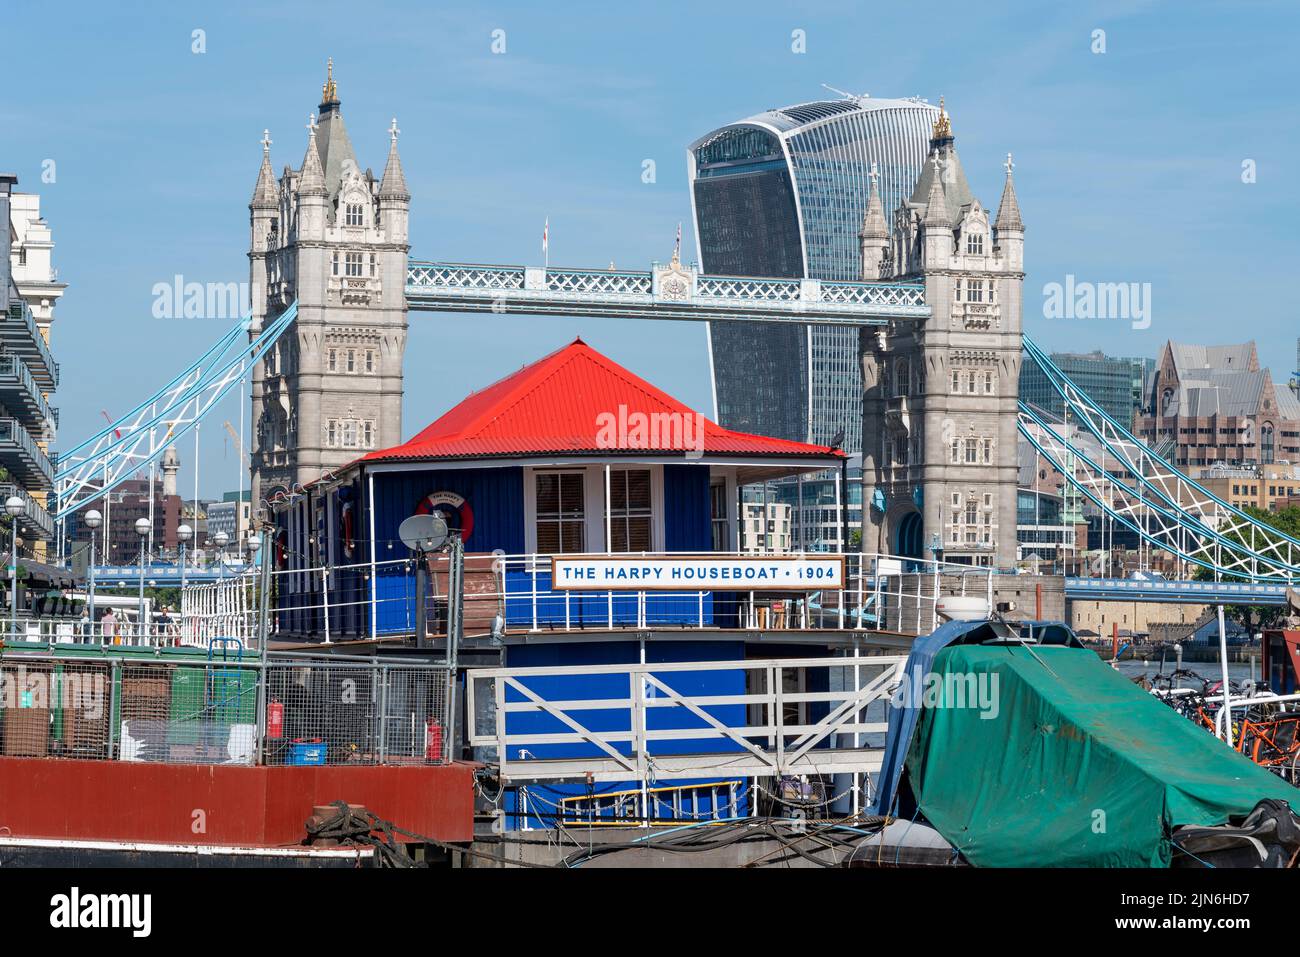 The Harpy Houseboat, off Butler's Wharf in Shad Thames, with Tower Bridge, 20 Fenchurch Street, Walkie Talkie building beyond. Restored floating home Stock Photo